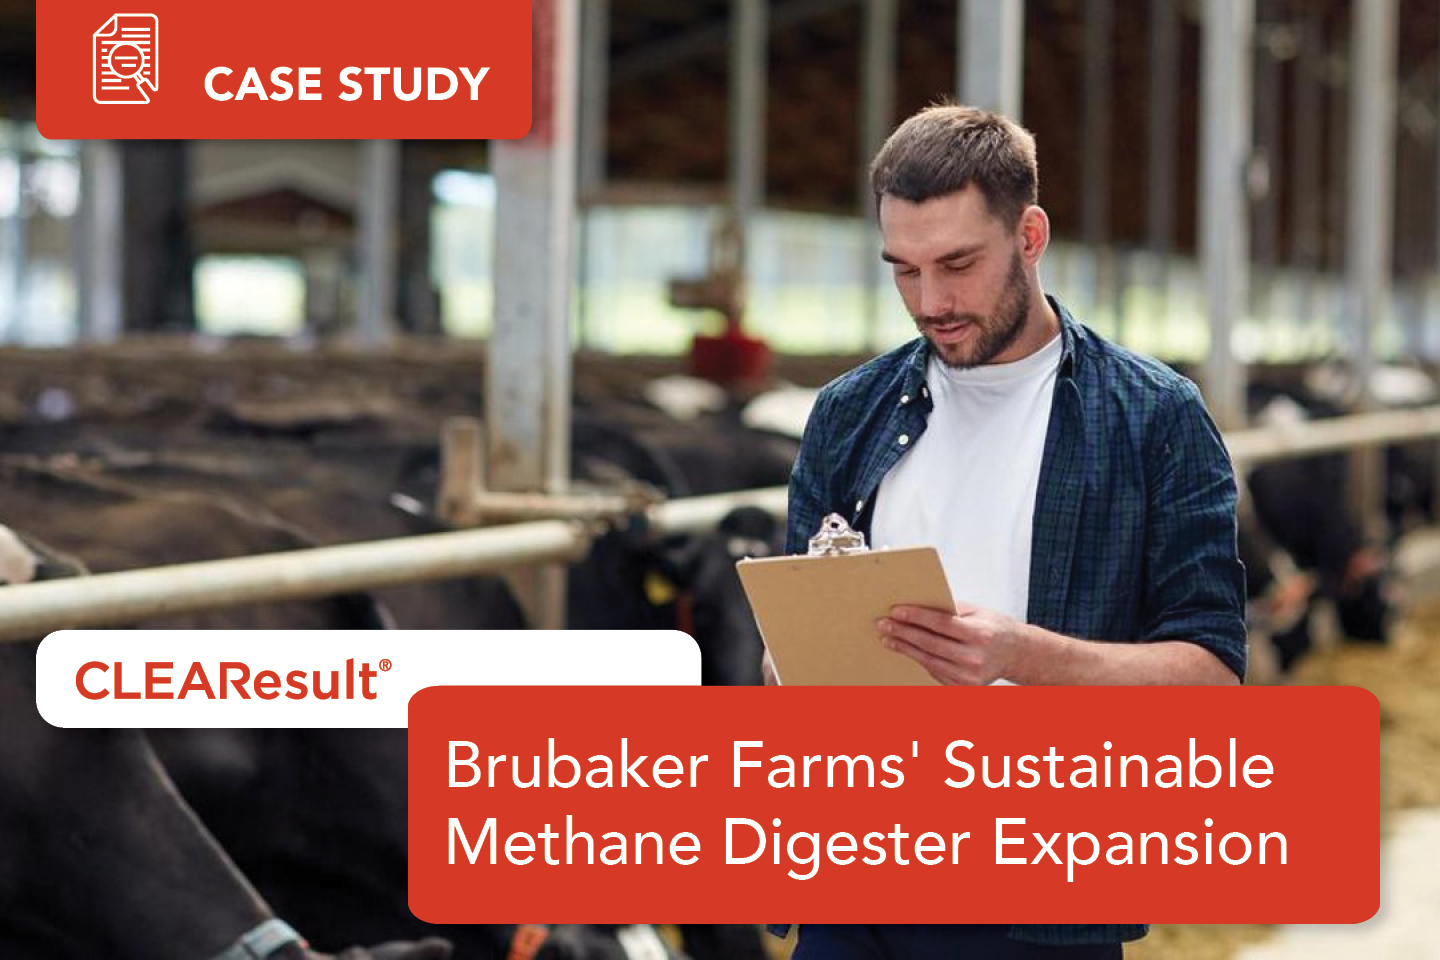 Brubaker Farms' methane digester expansion: a sustainable and cost-effective solution